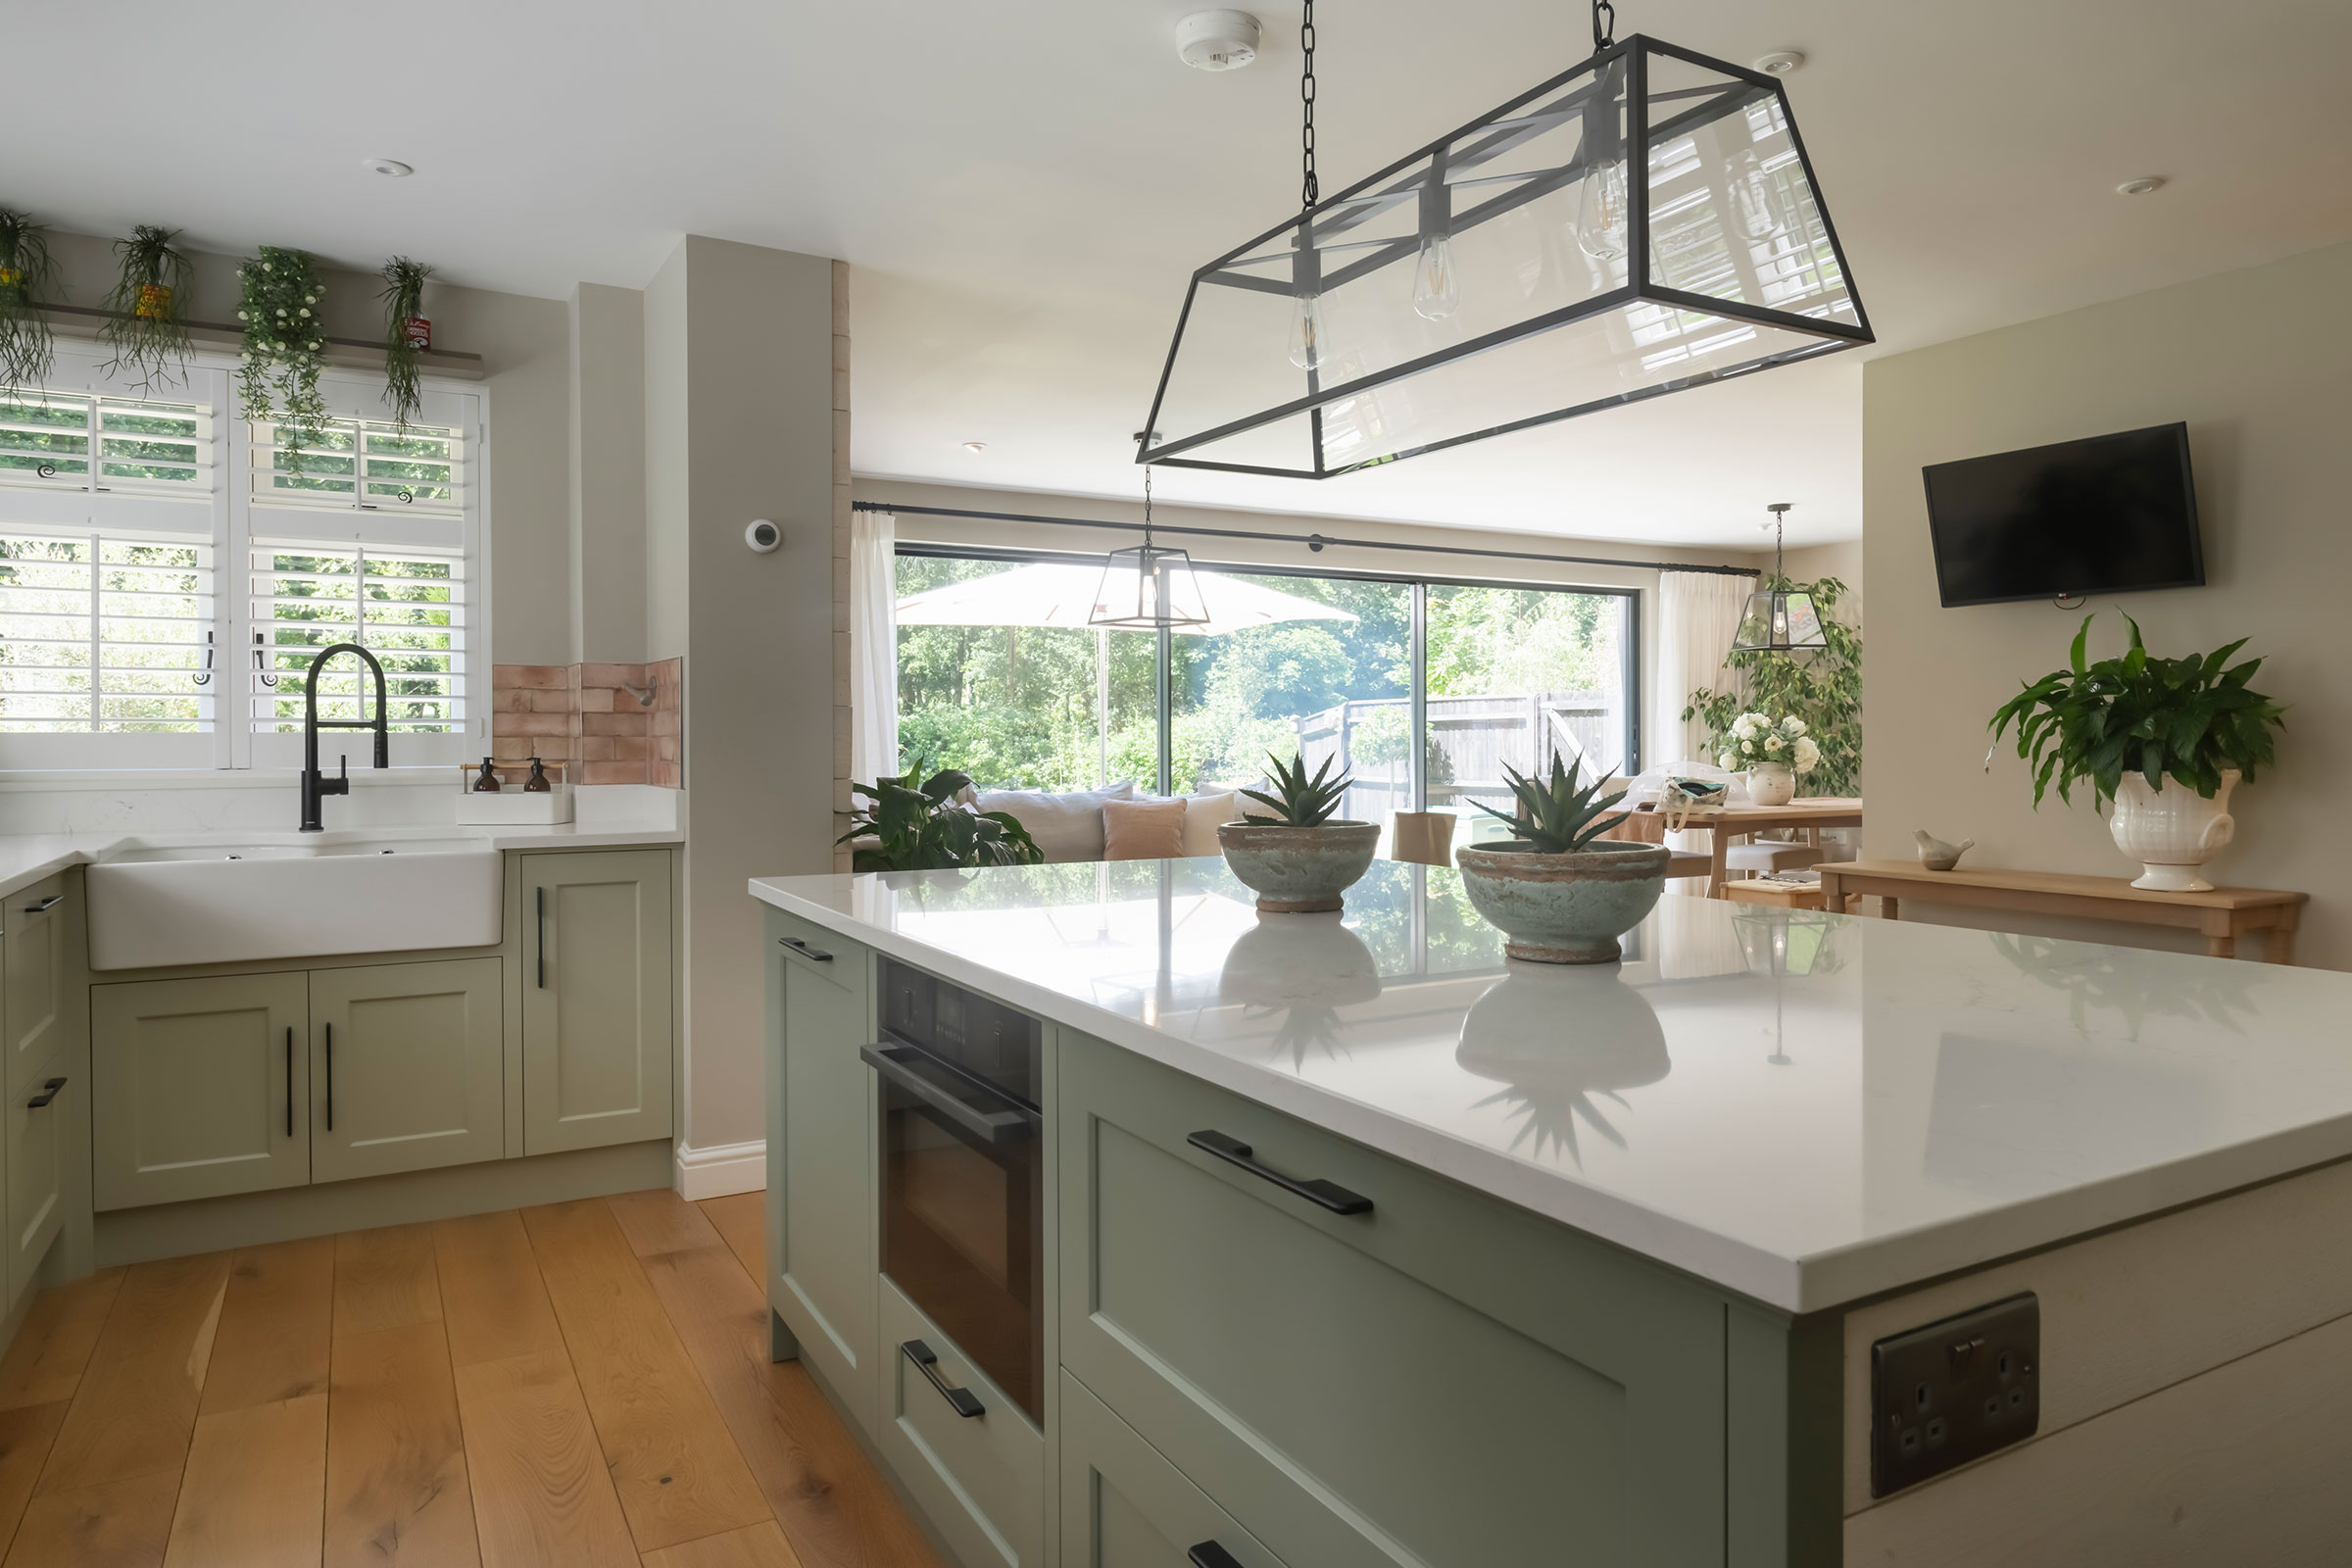 a finished project by kitchenmakers within this gorgeous home